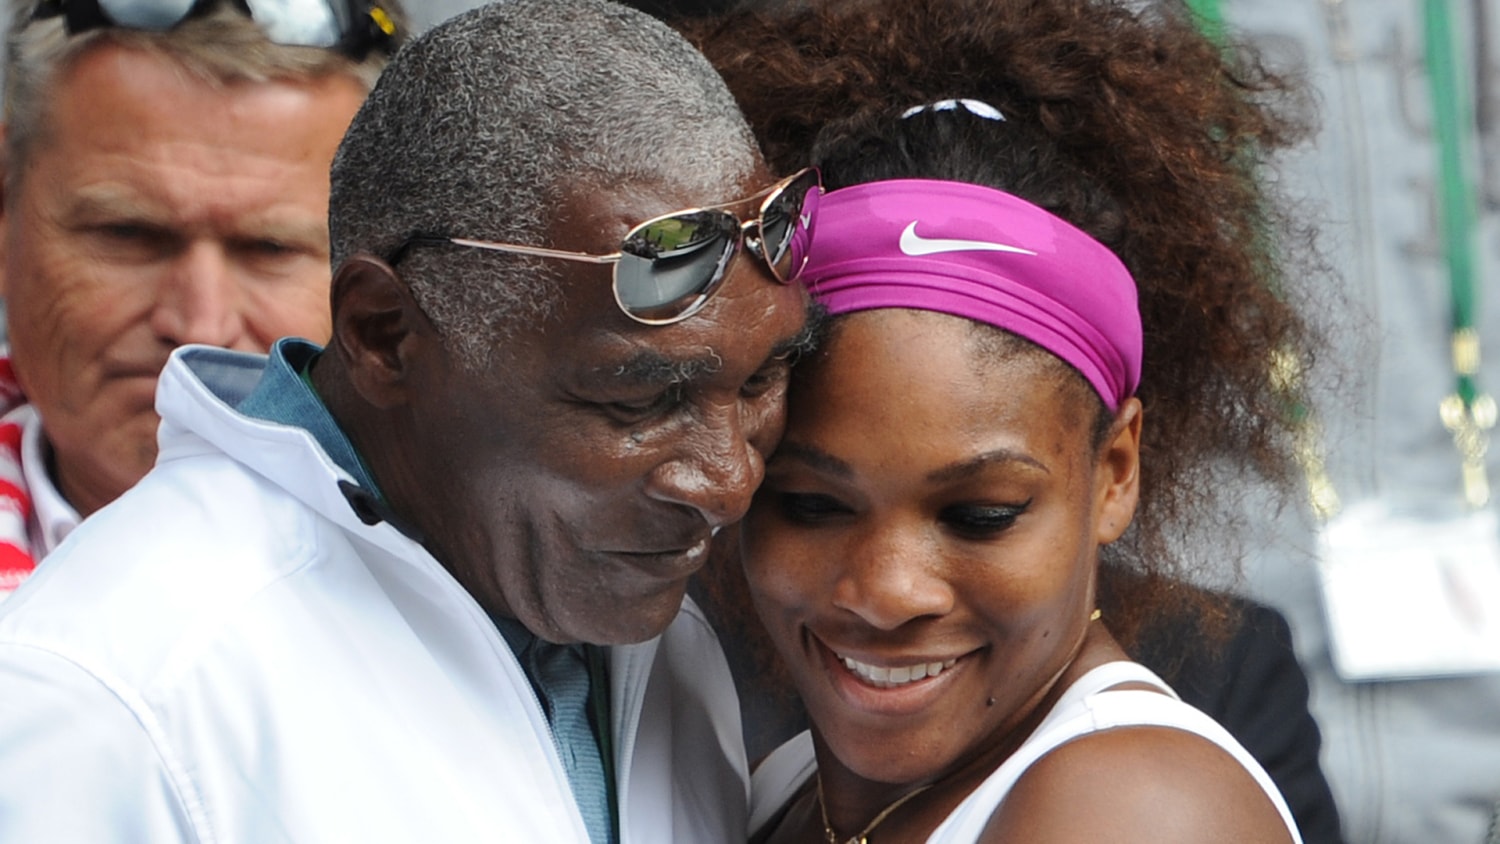 Serena Williams on why her dad didnt walk her down the aisle at her wedding